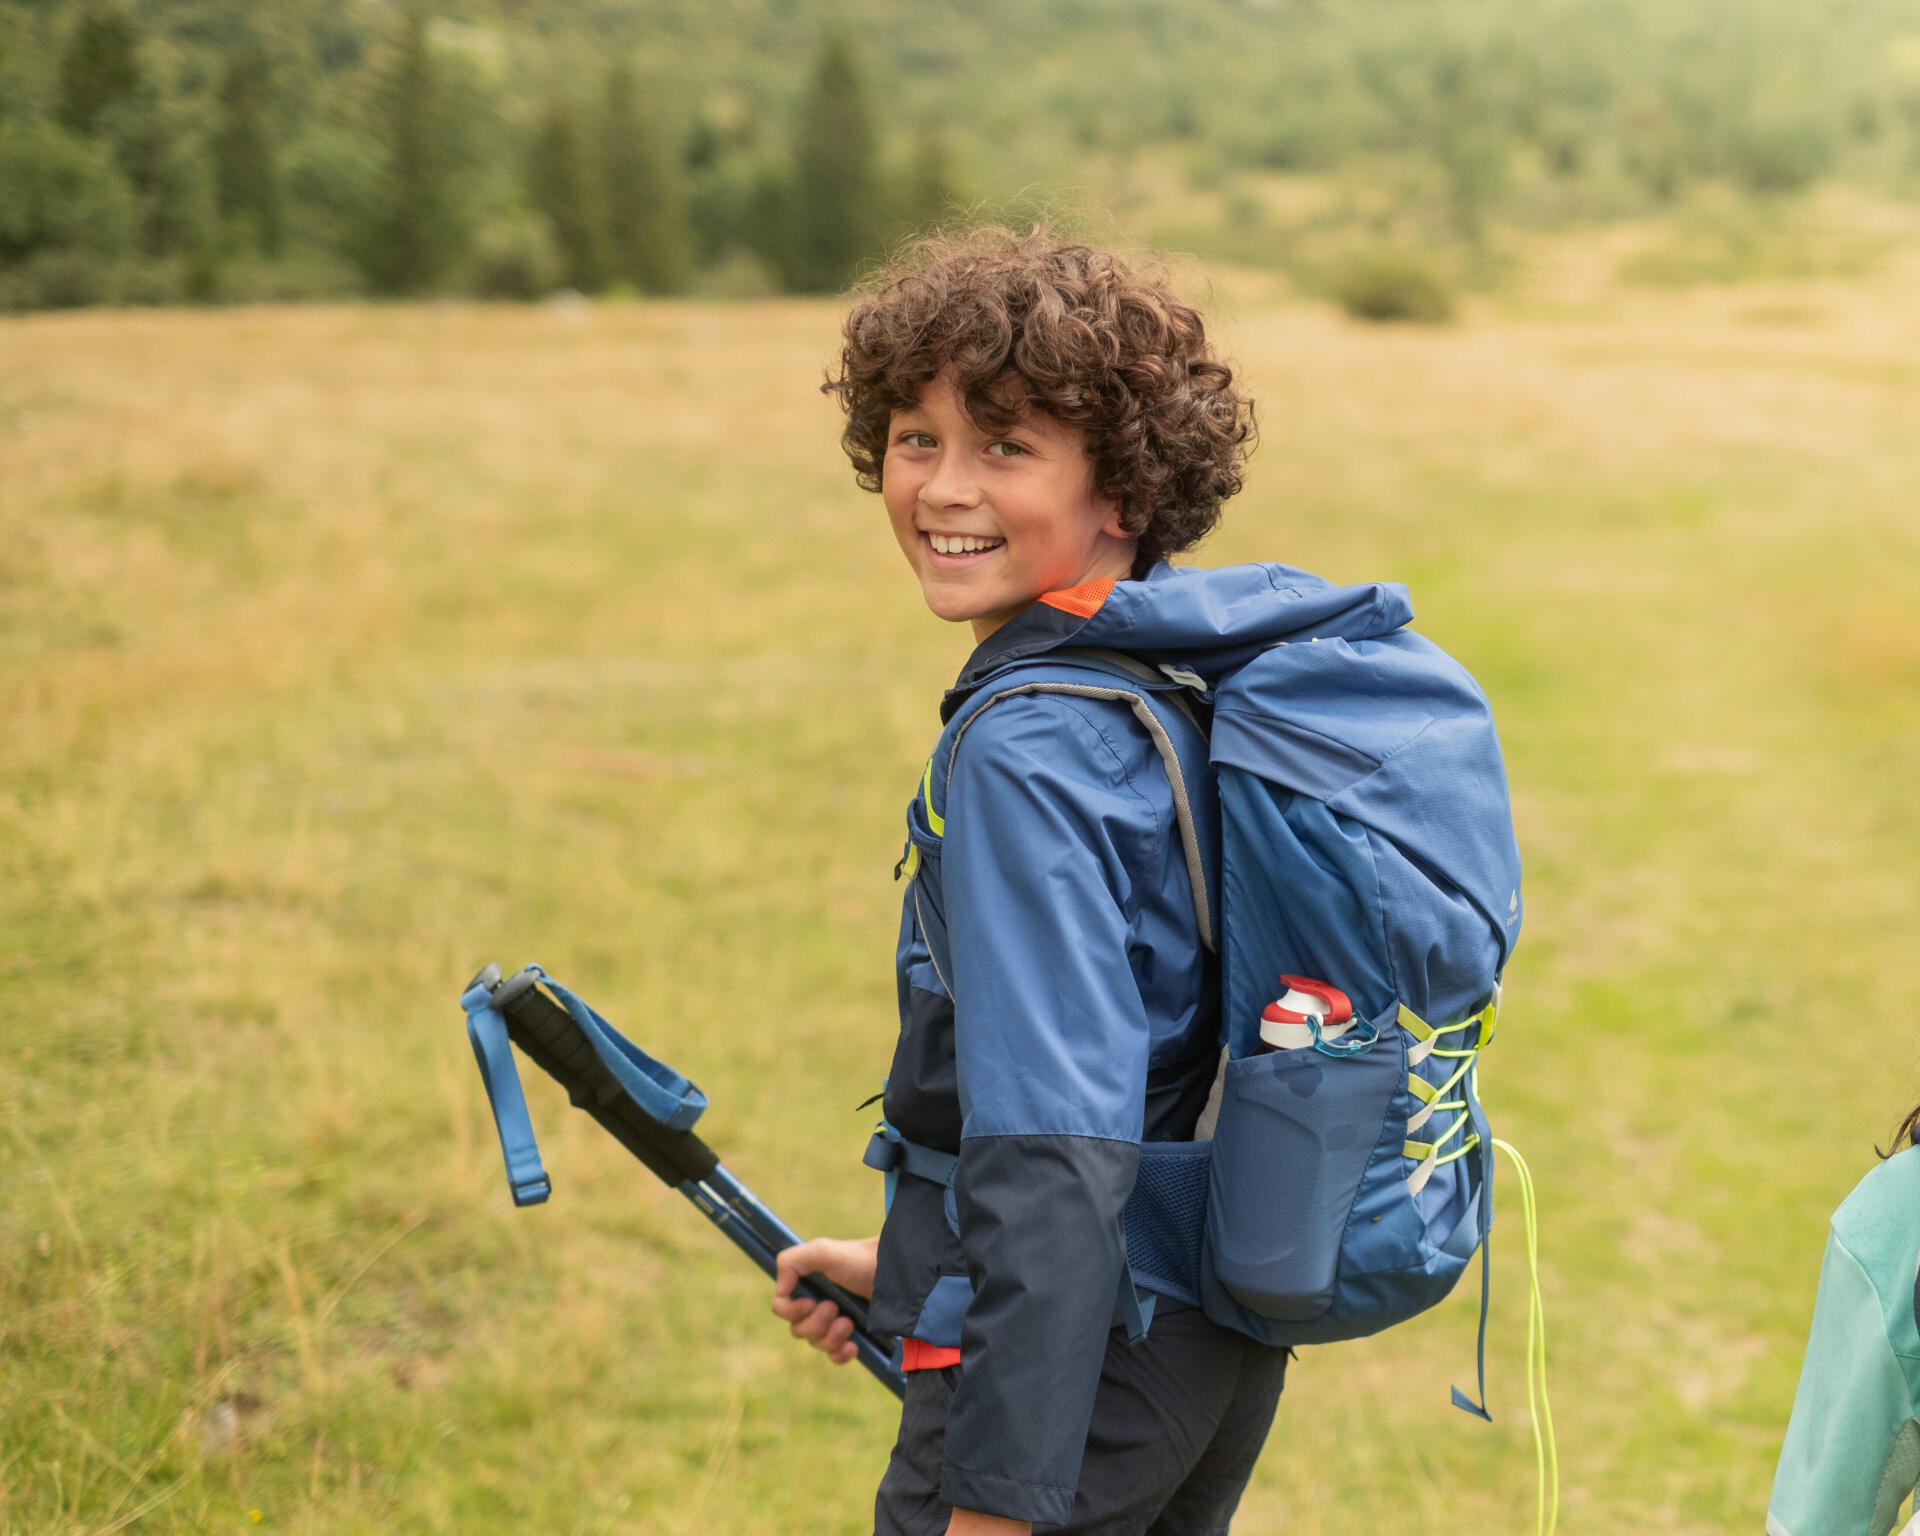 ANd to make sure they're comfy, here's our hiking gear for kids